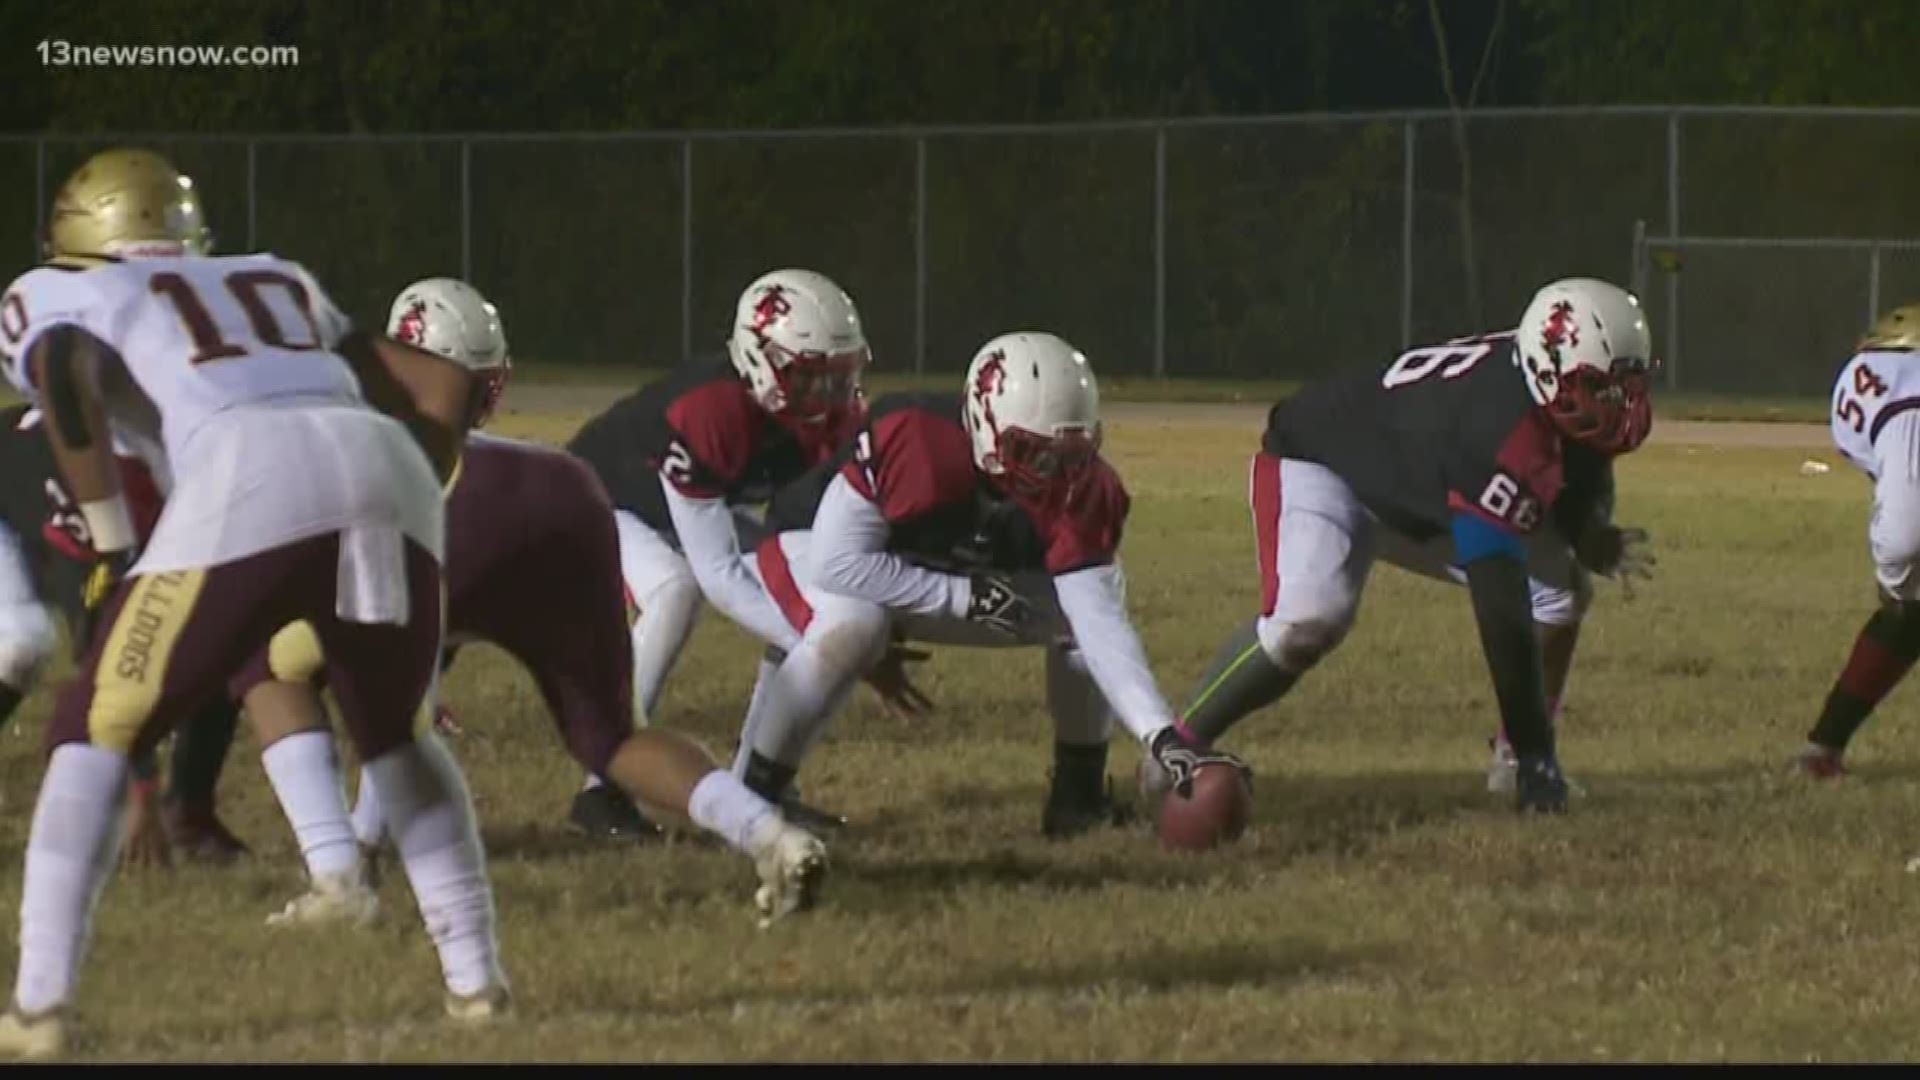 In Class 4A Lake Taylor shutout King's Fork 42-0 and Class 3A Phoebus had enough to beat York 21-13.